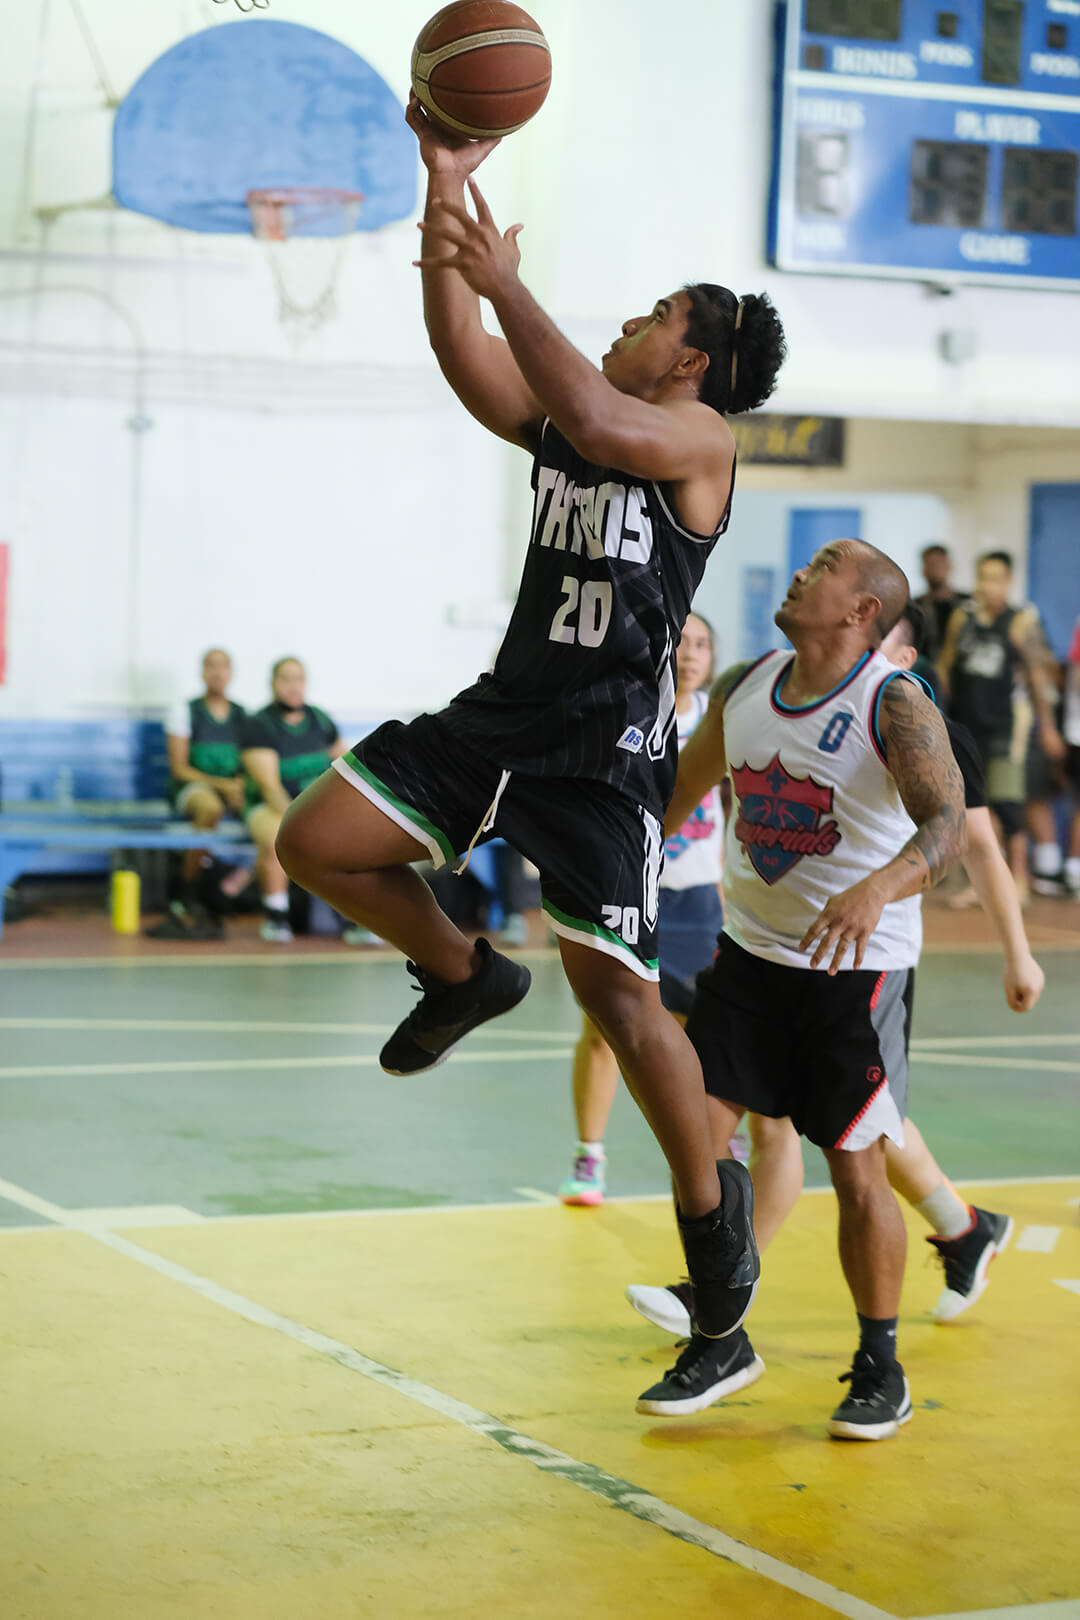 Basketball player jumping for a shot